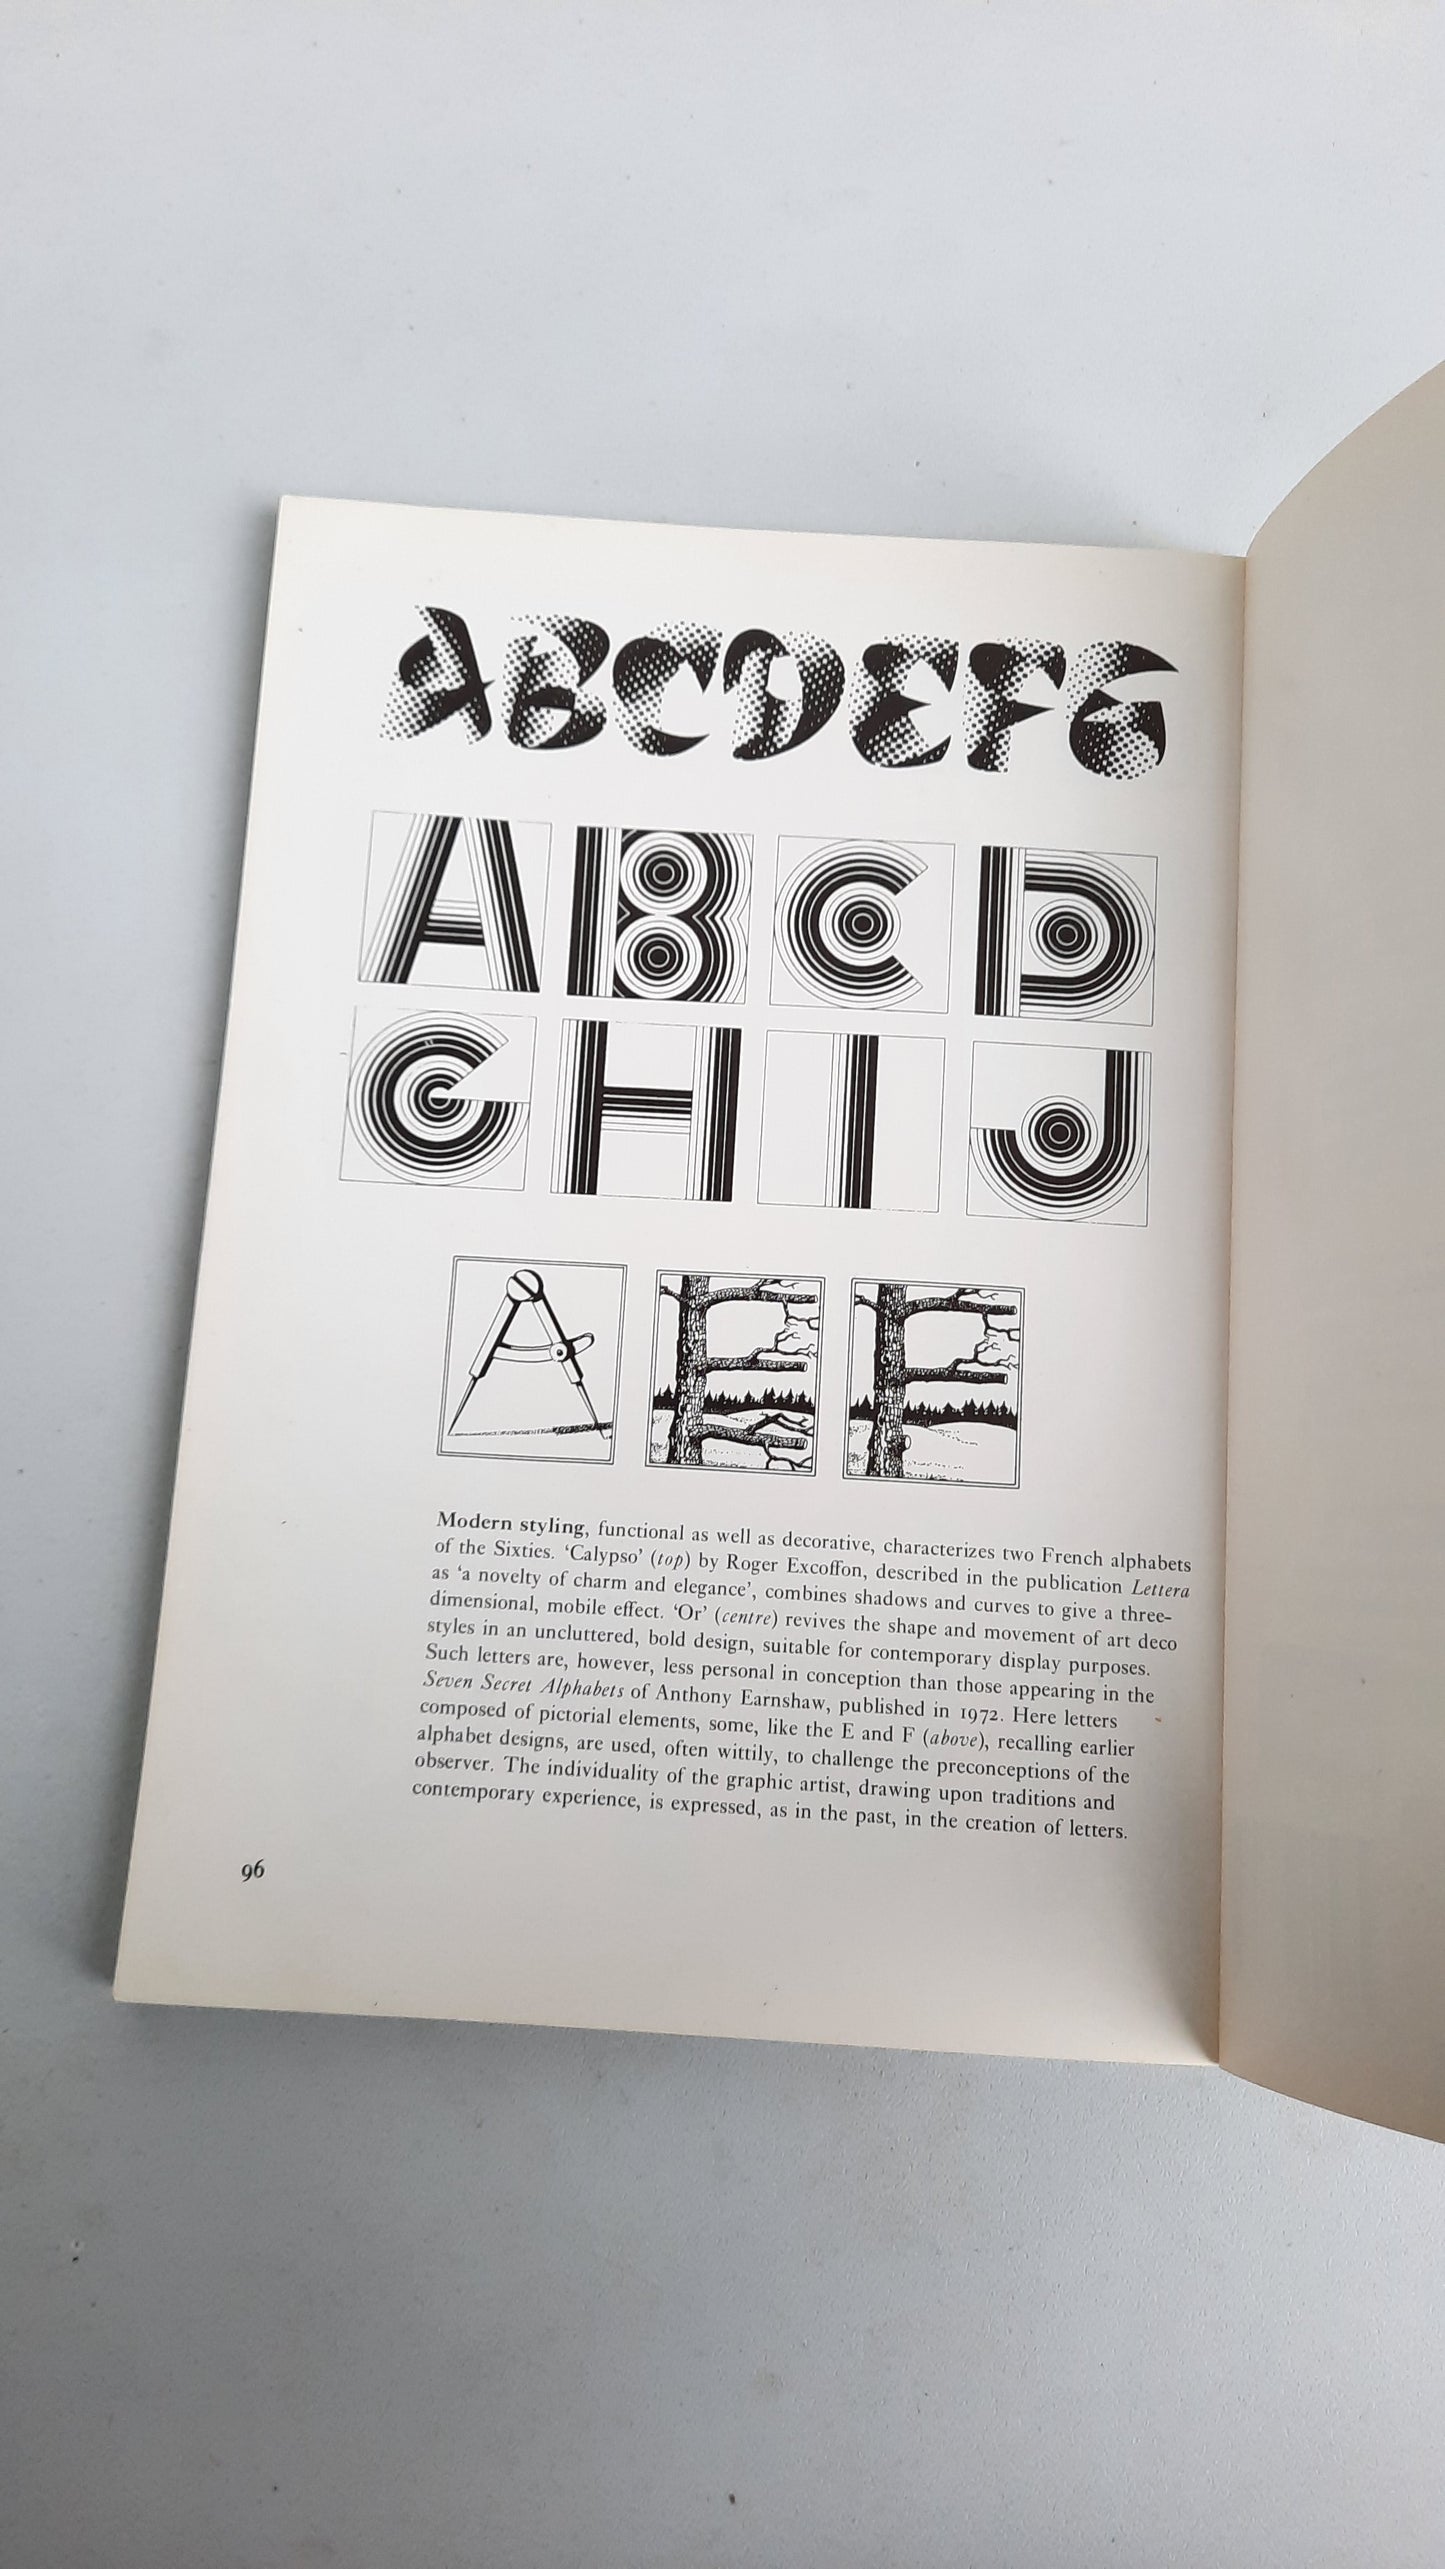 "Ornamental Alphabets and Initials" 1983 by Alison Harding